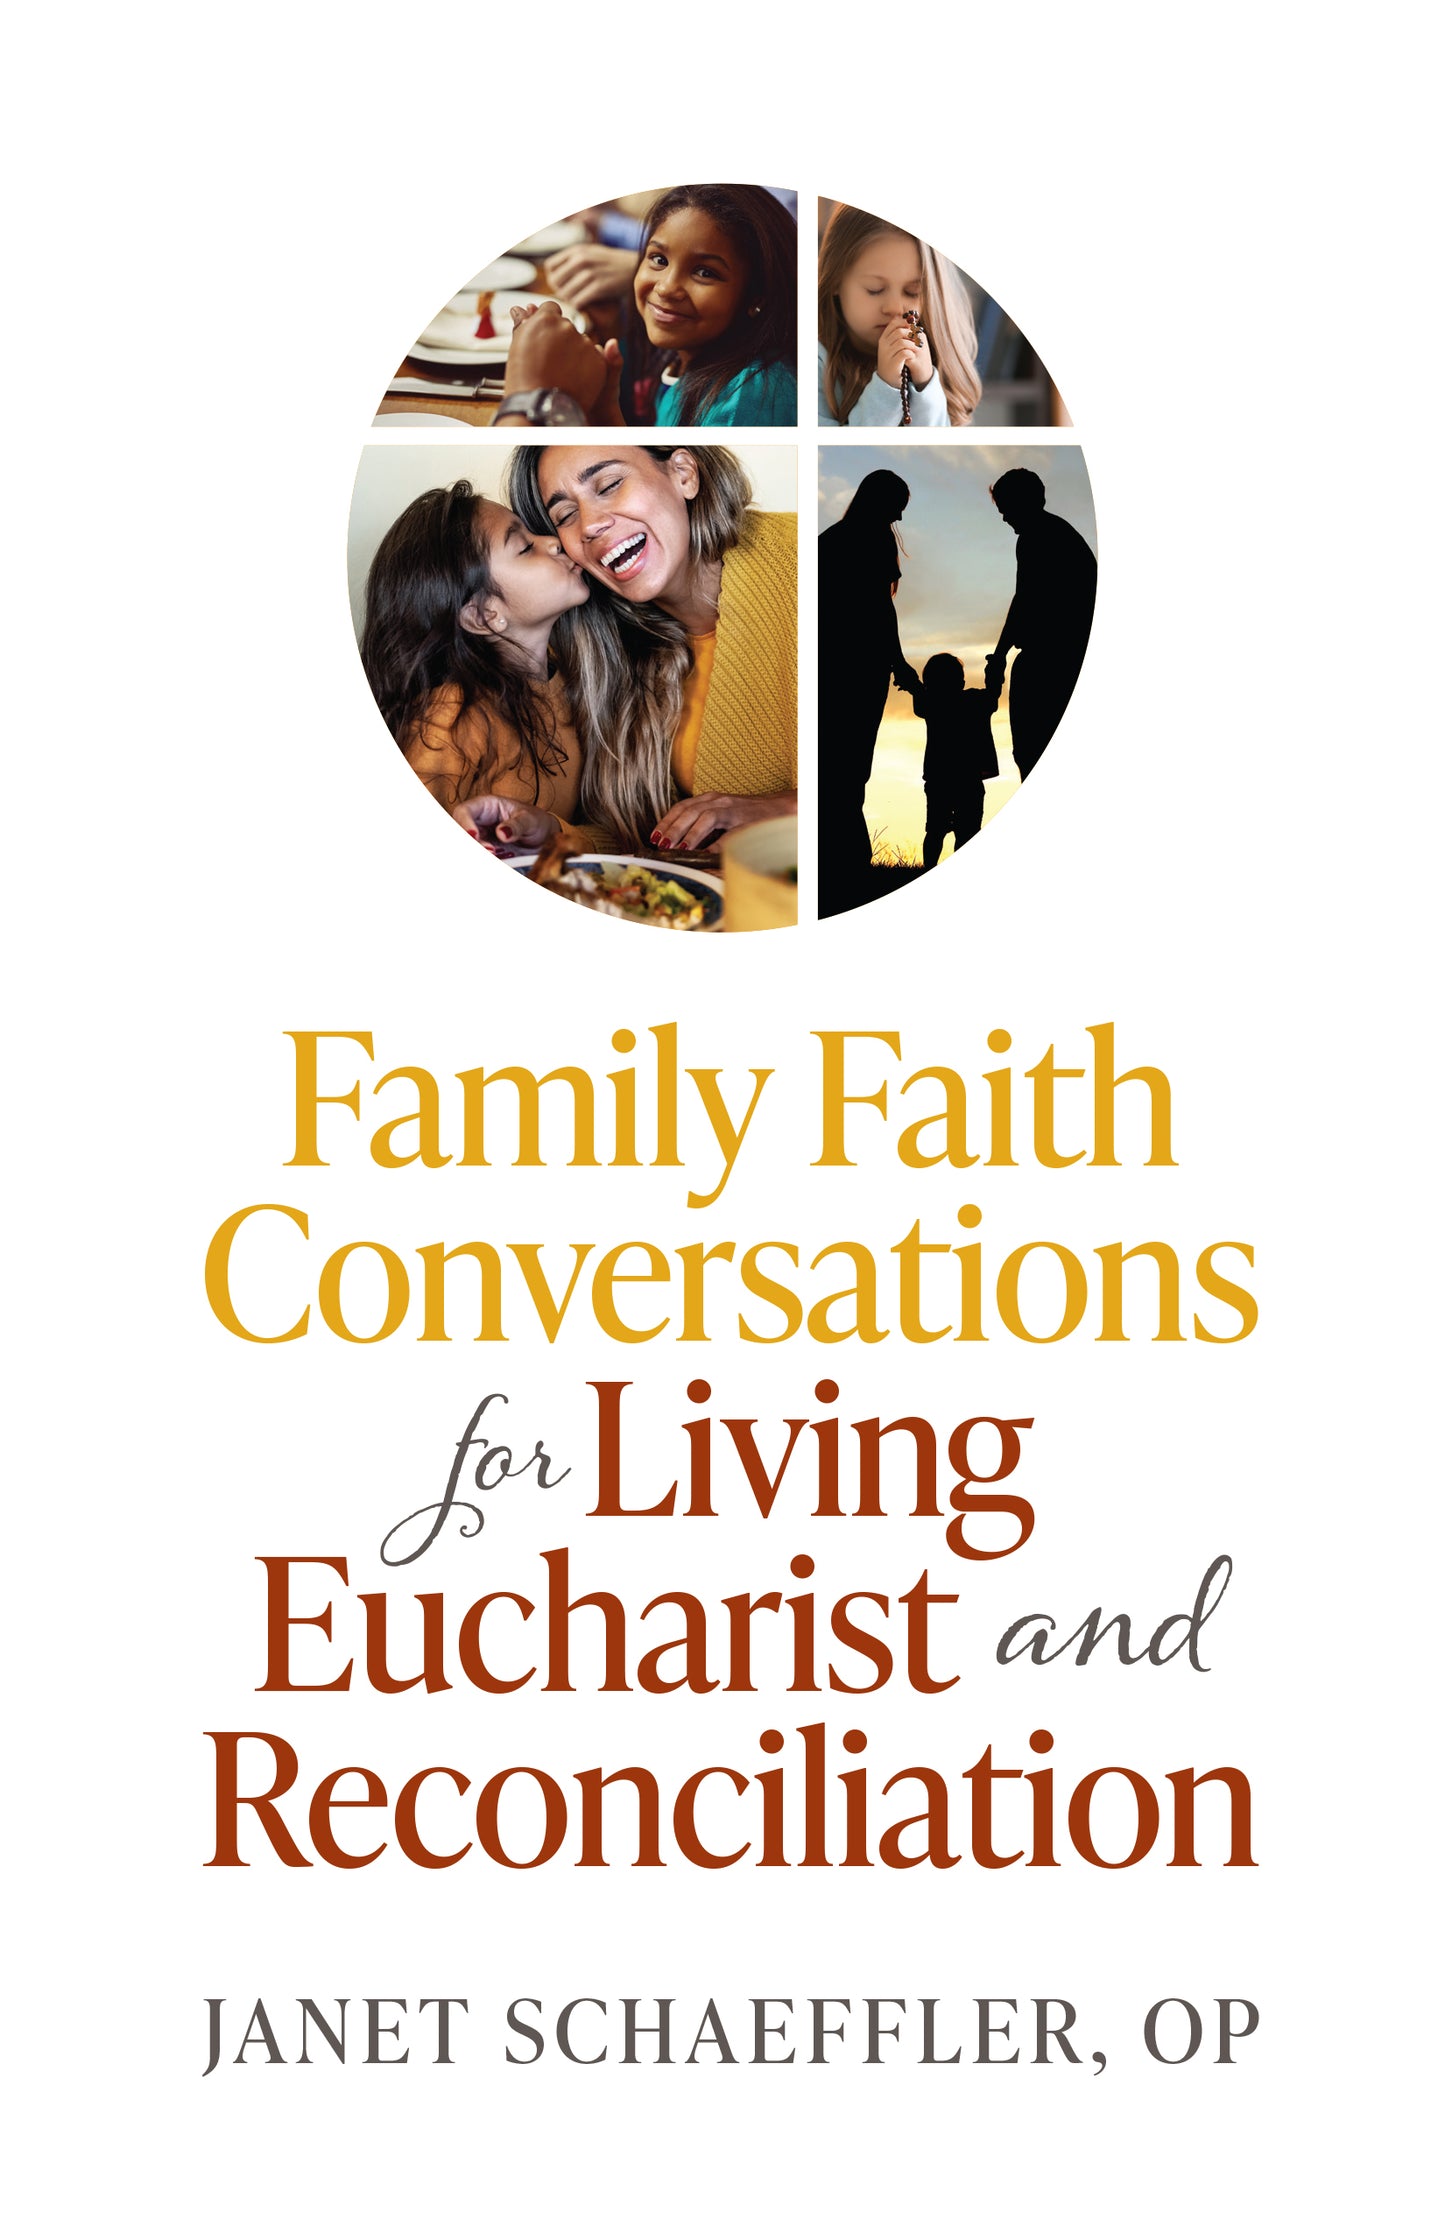 Family Faith Conversations for Living Eucharist and Reconciliation